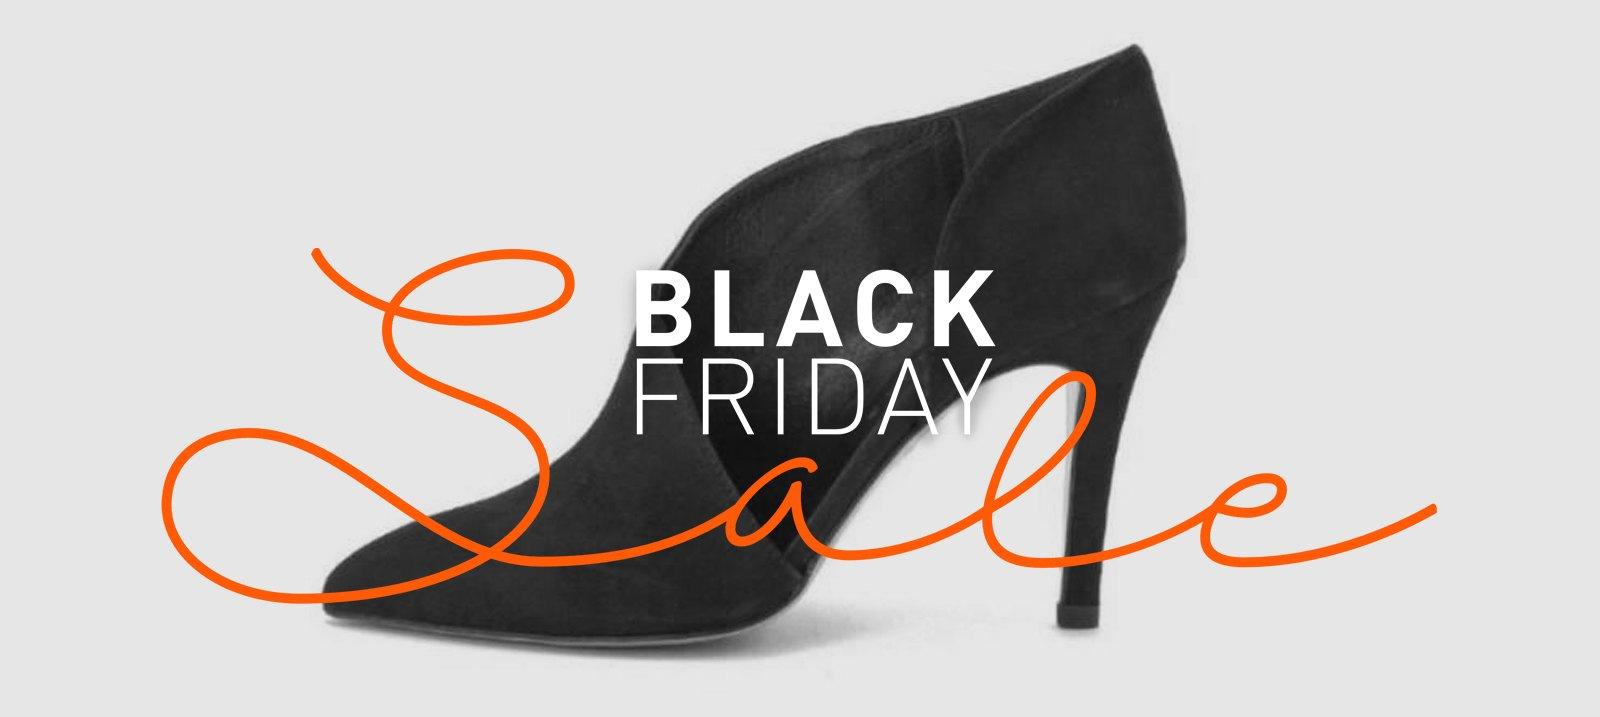 BLACK FRIDAY: Women's Shoes